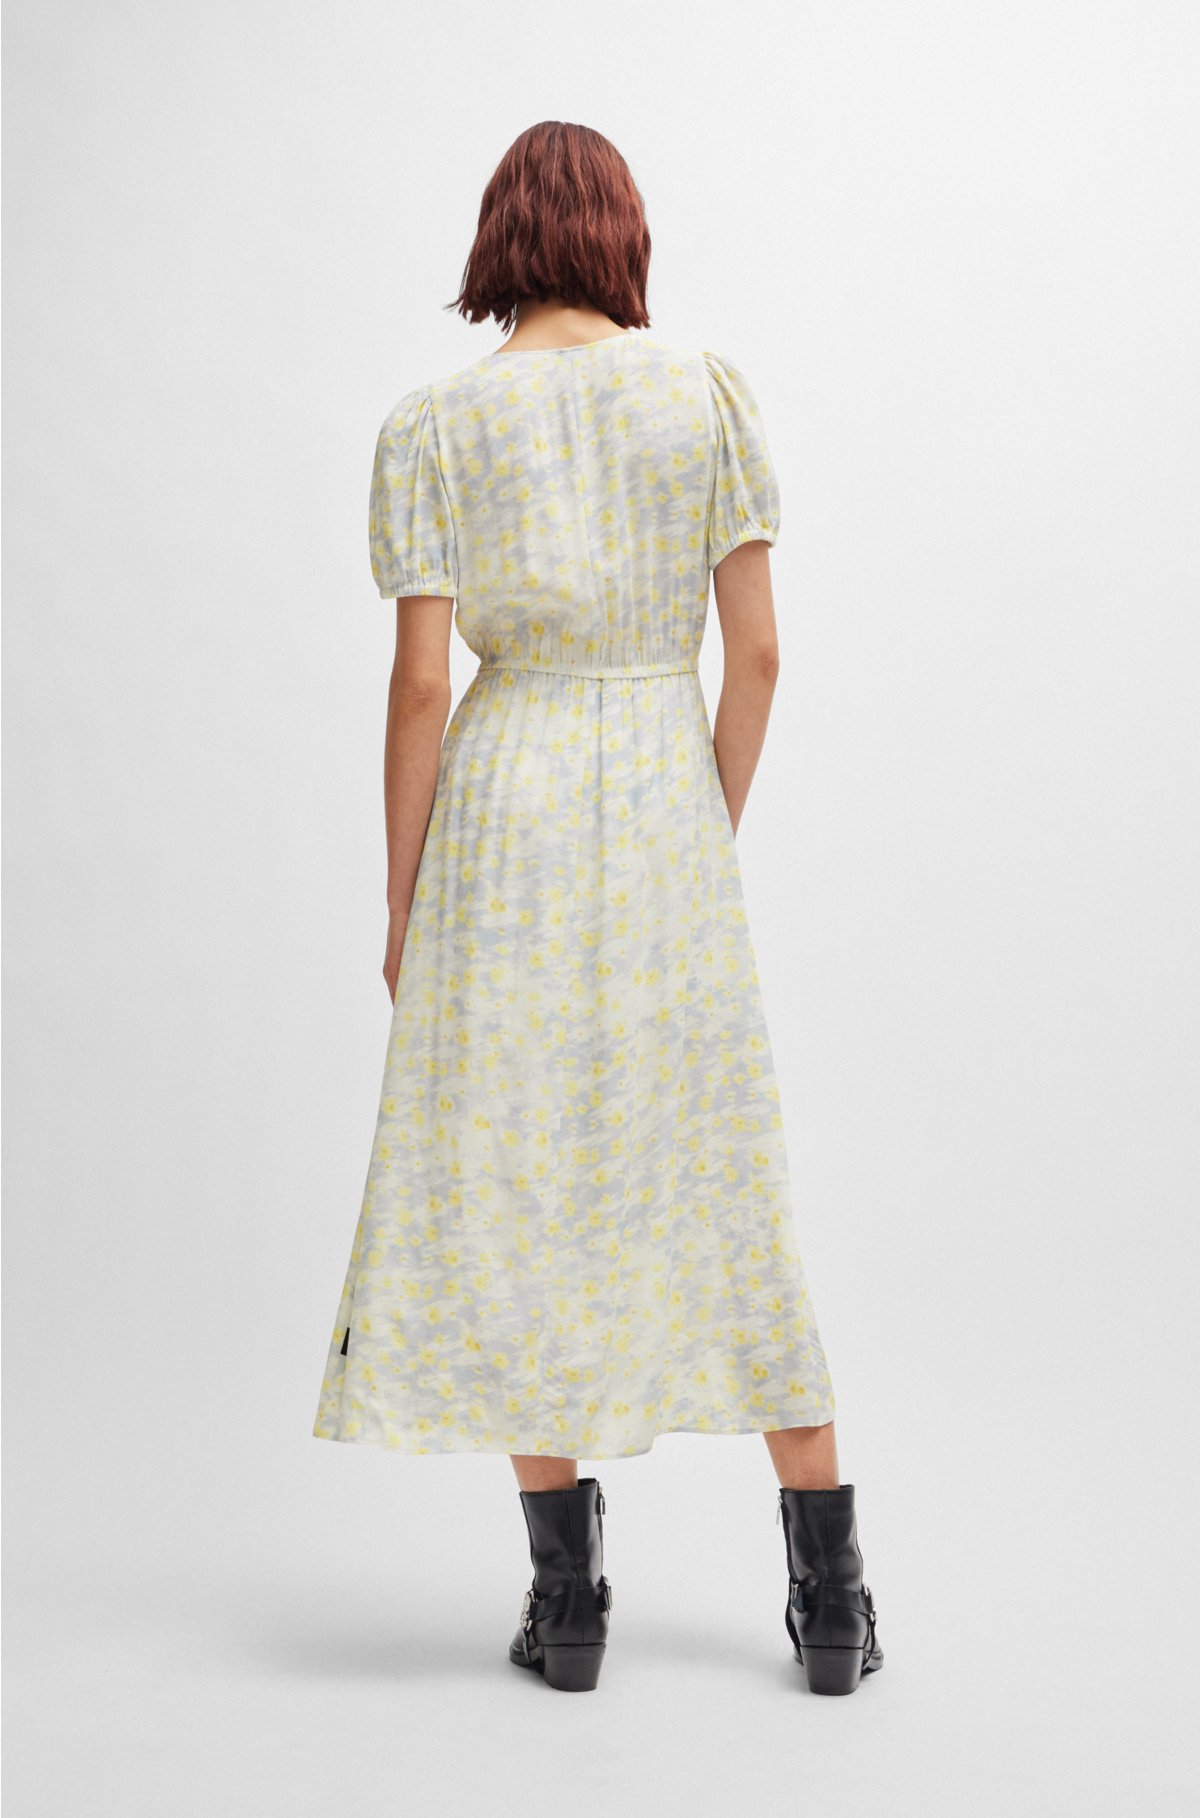 Wrap-front dress in printed fabric, Patterned